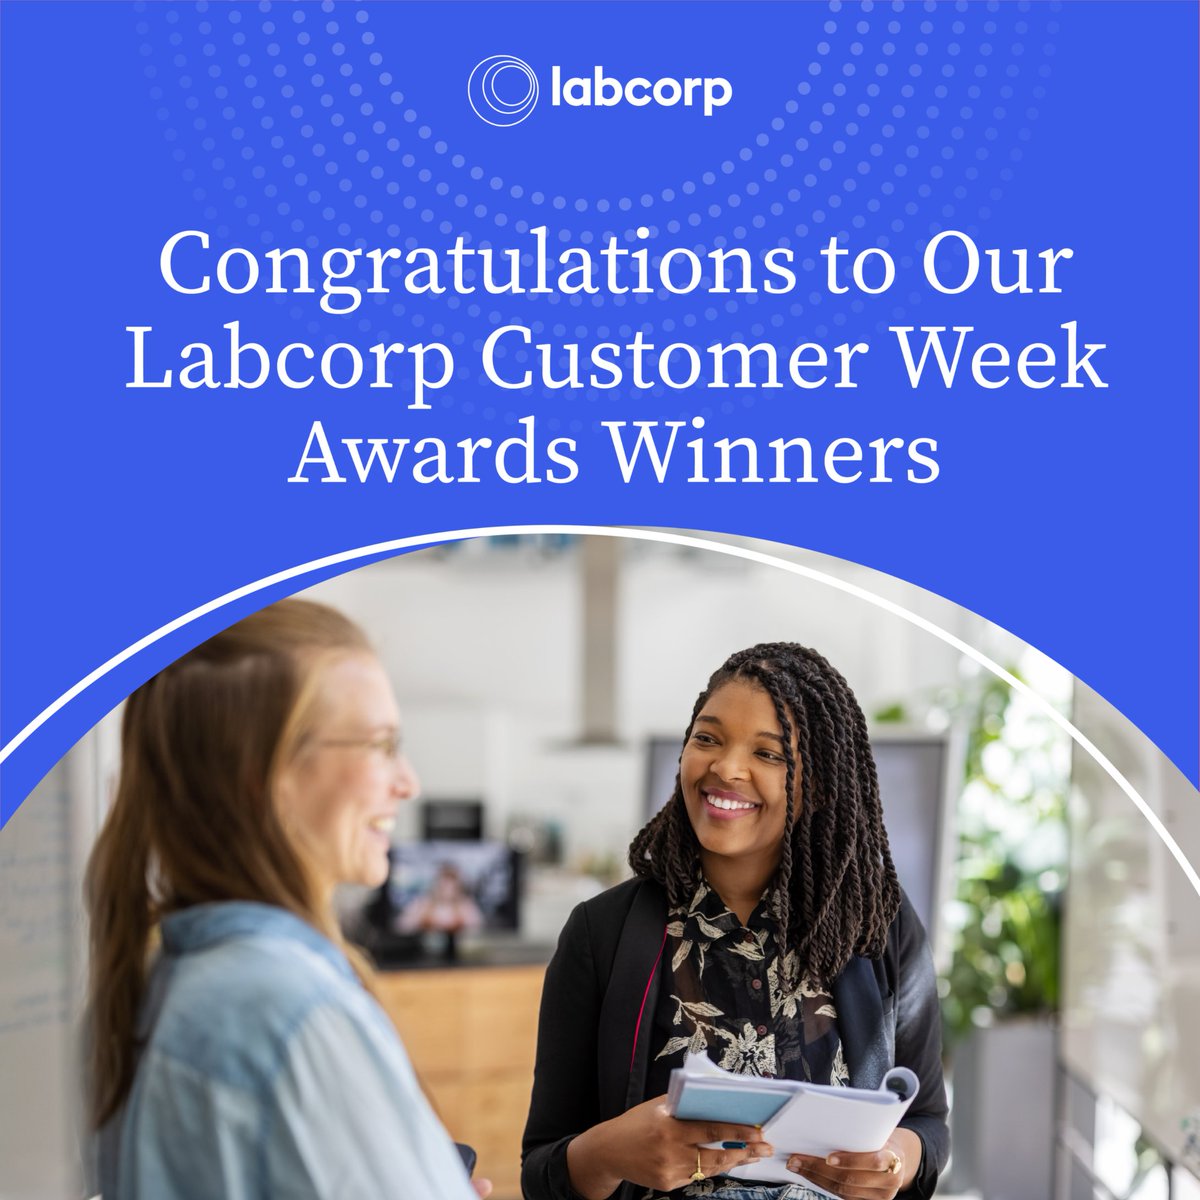 This week, we celebrated Labcorp Customer Week, an opportunity to highlight how important our customers are to our mission of improving health and improving lives. Congratulations to our Customer Week award winners; thank you for your unwavering focus on our customers.